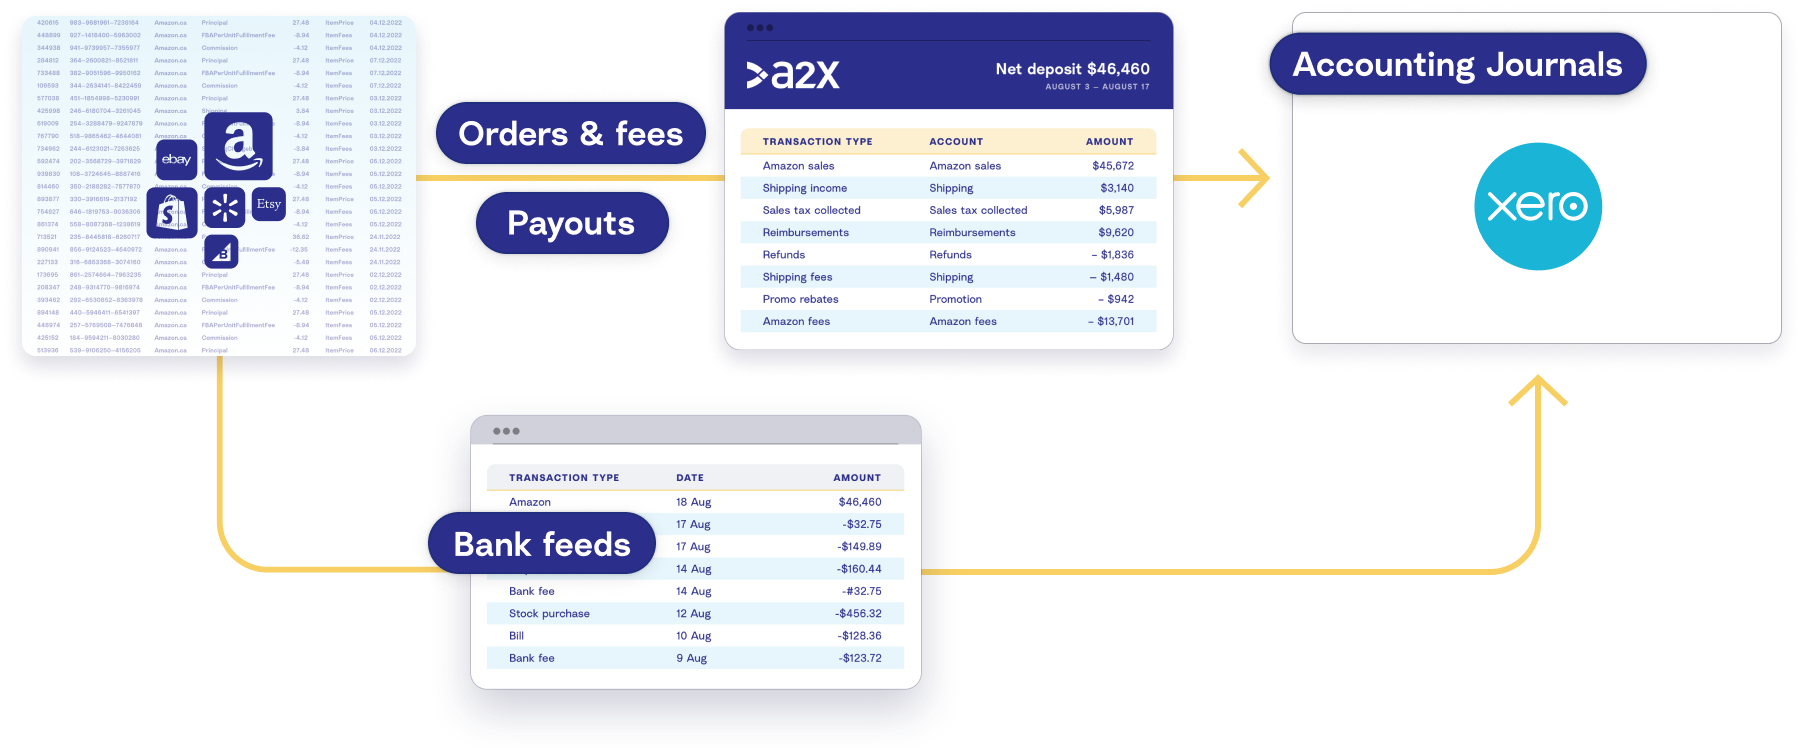 A diagram showing how A2X gets sales data into Xero to match with the bank feed